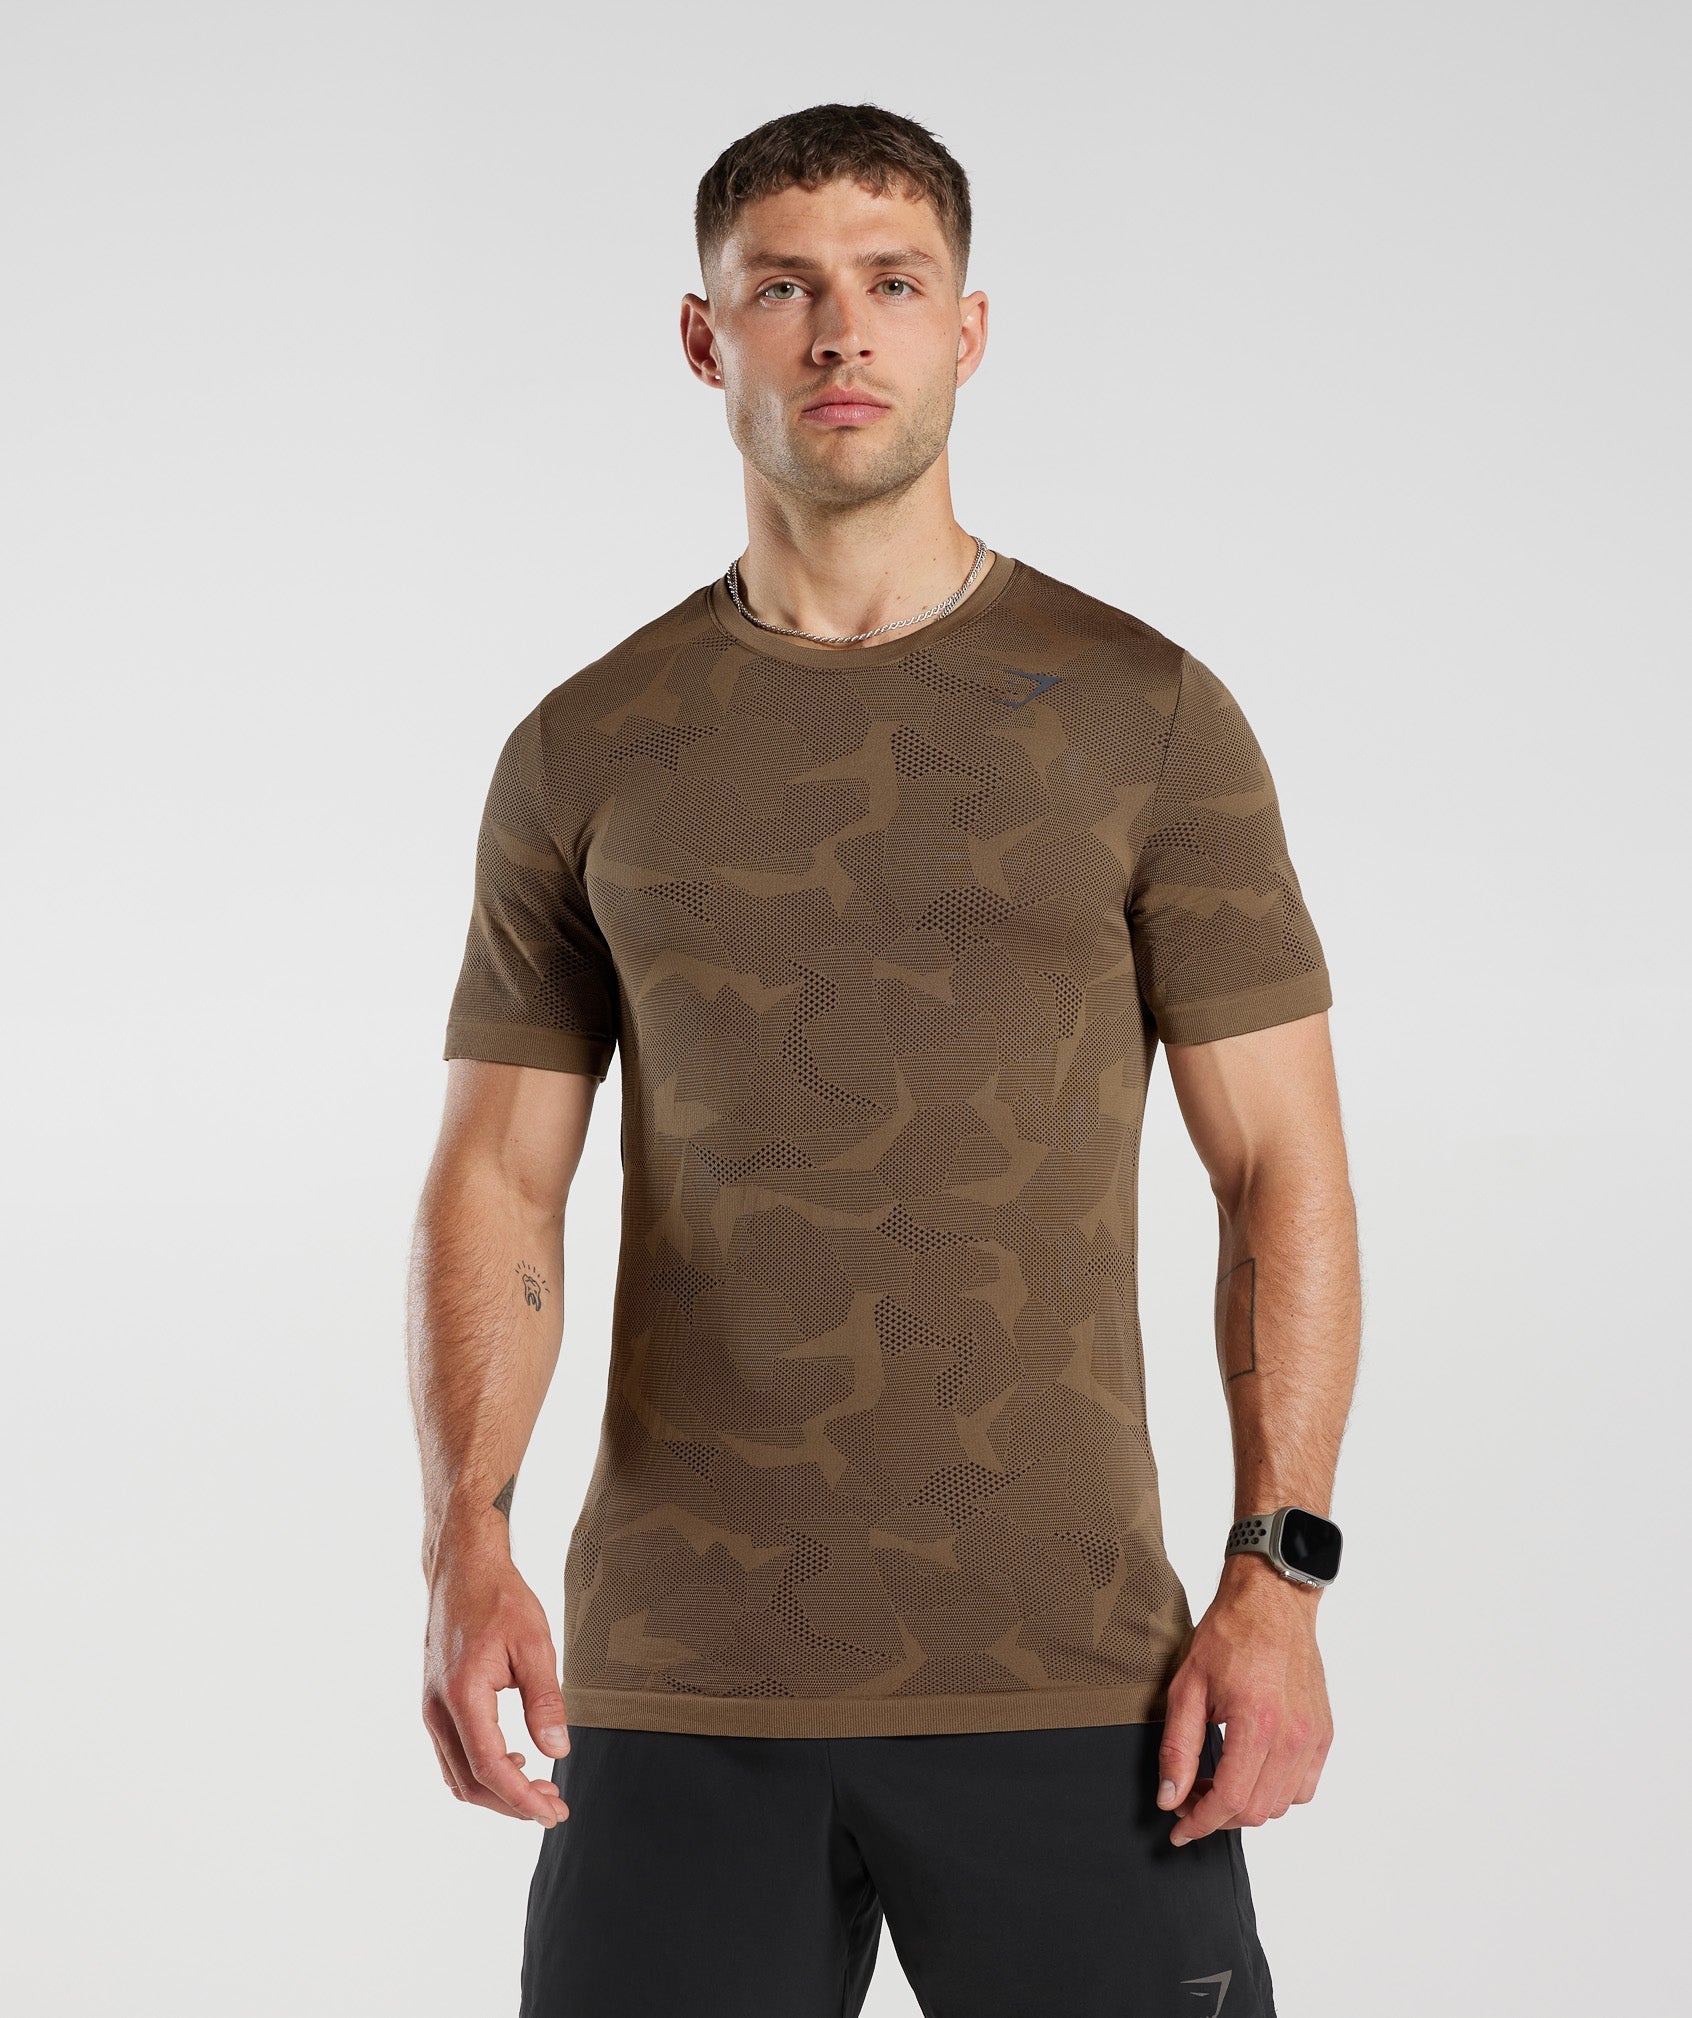 Sport Seamless T-Shirt in Fossil Brown/Black - view 1